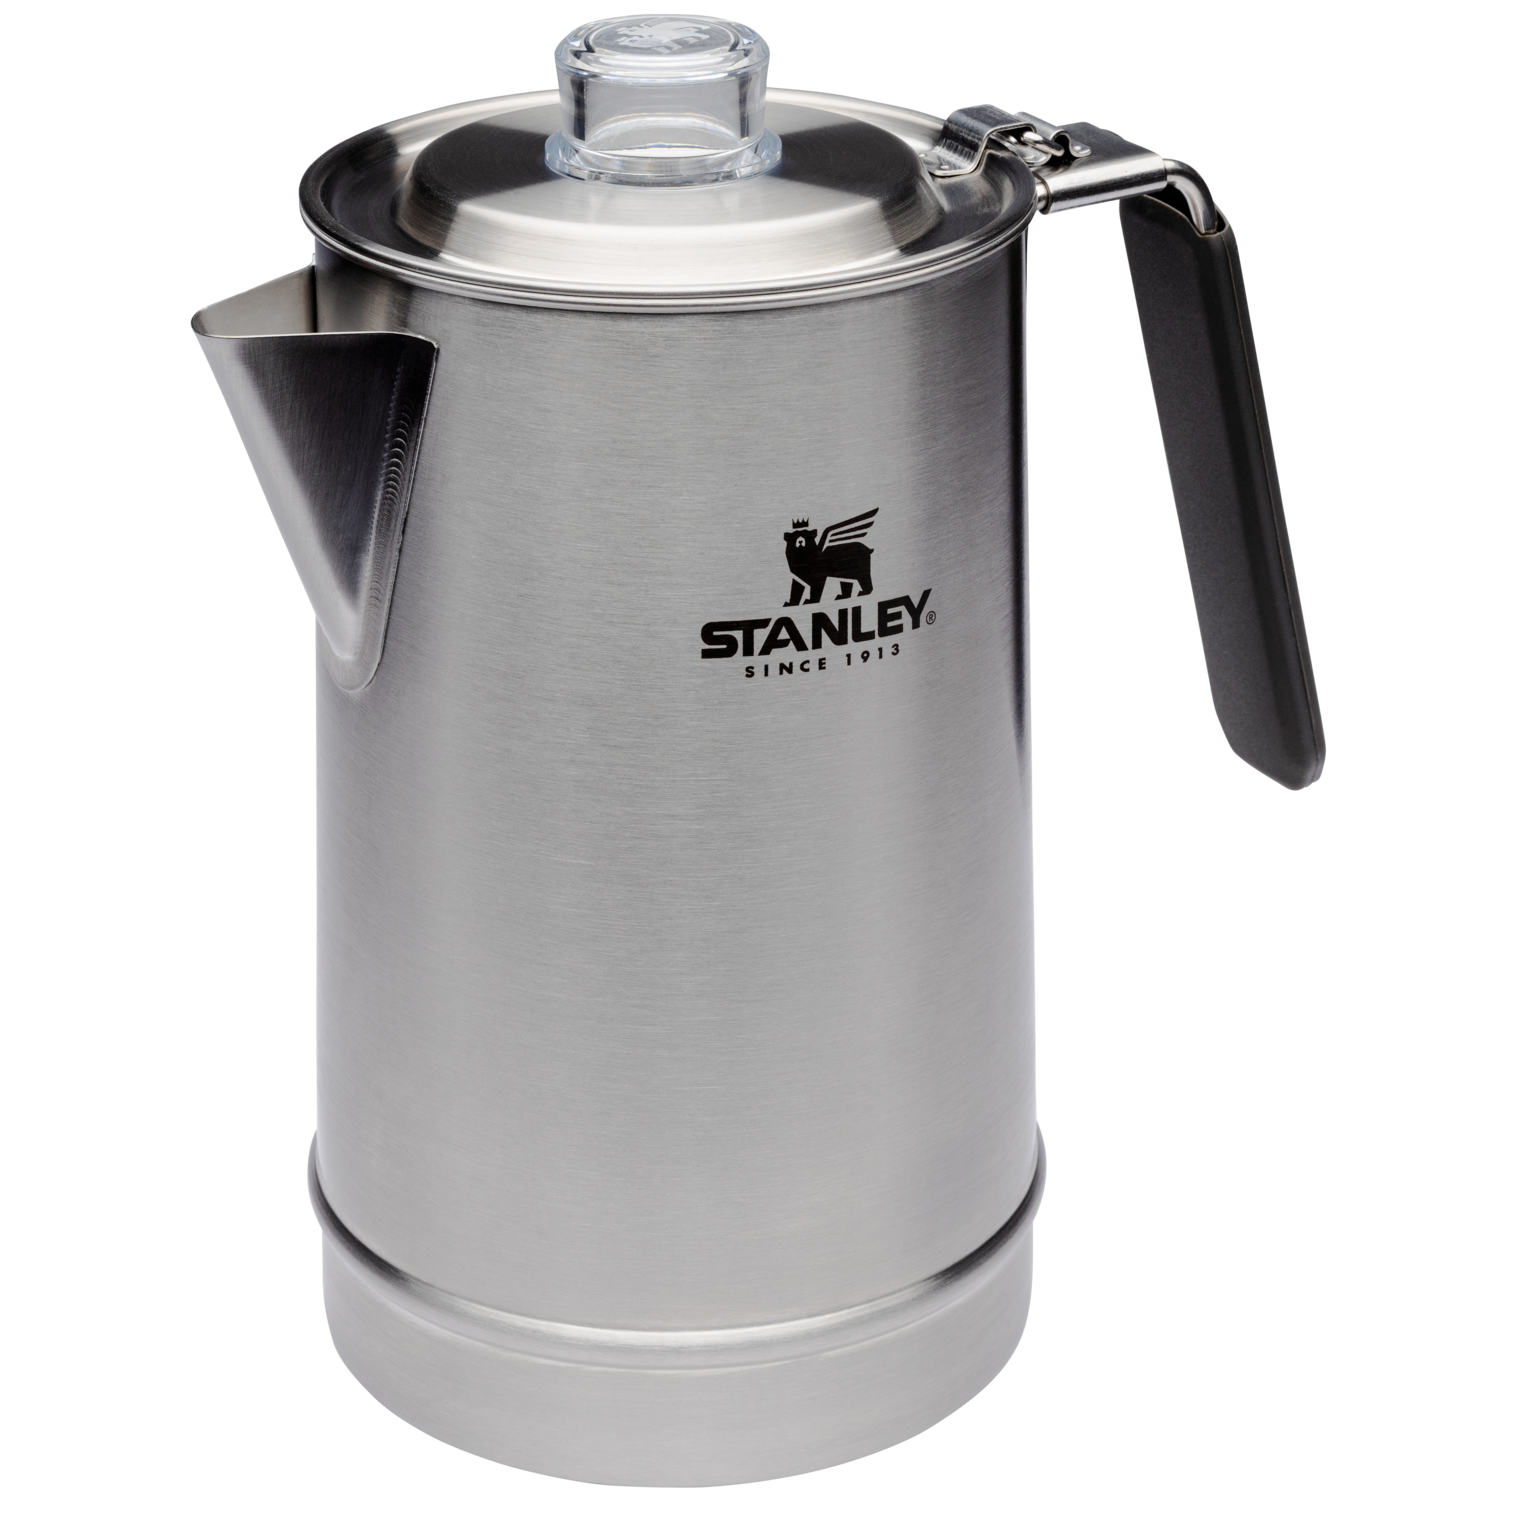 The Hold Tight Percolator| 1.1 QT: Stainless